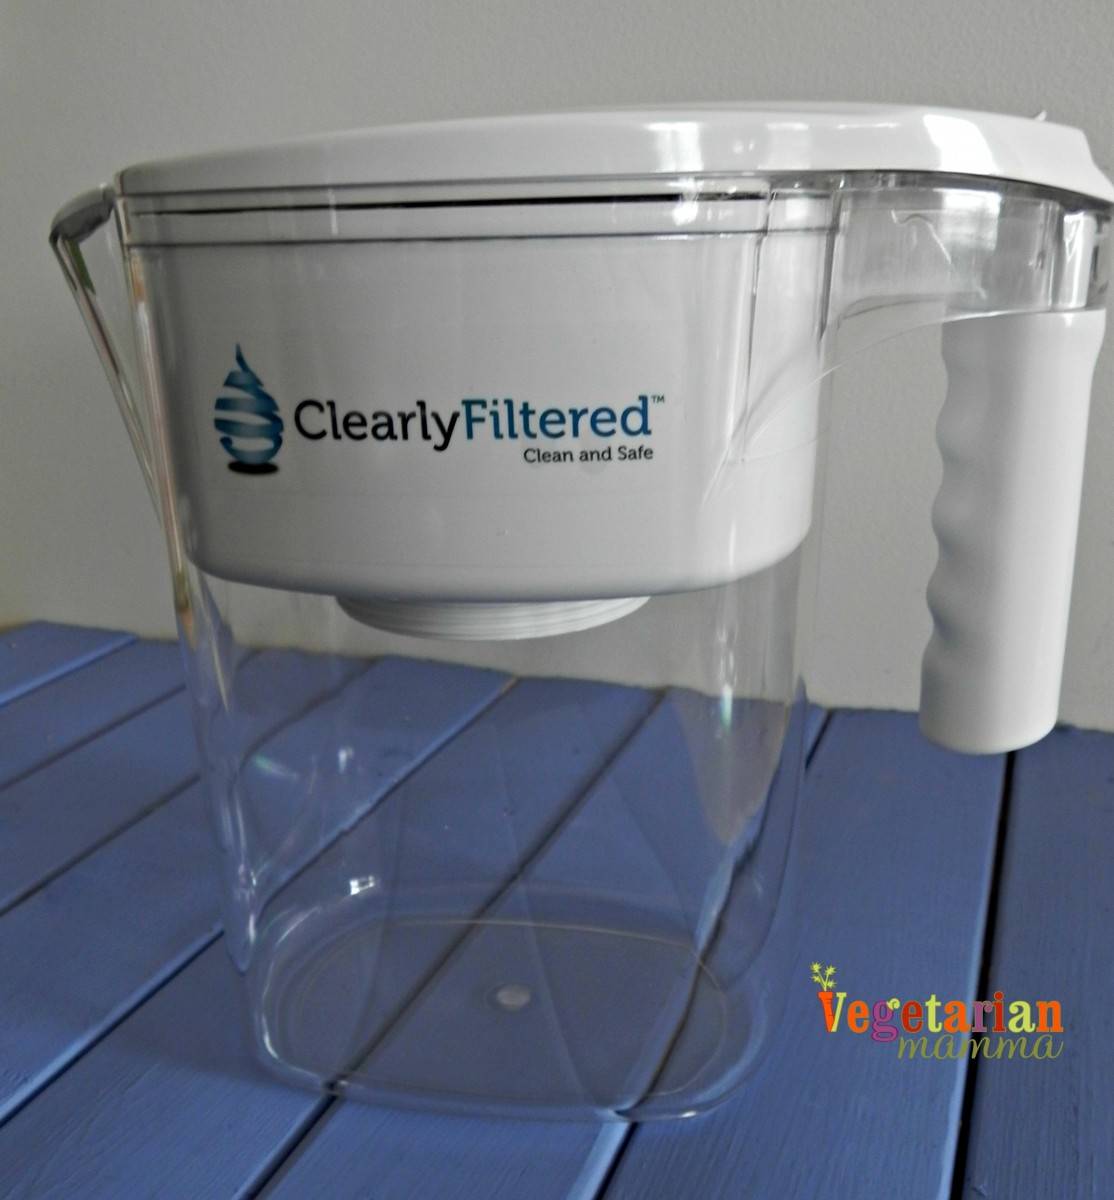 Clearly Filtered – #product #review @clearlyfiltered